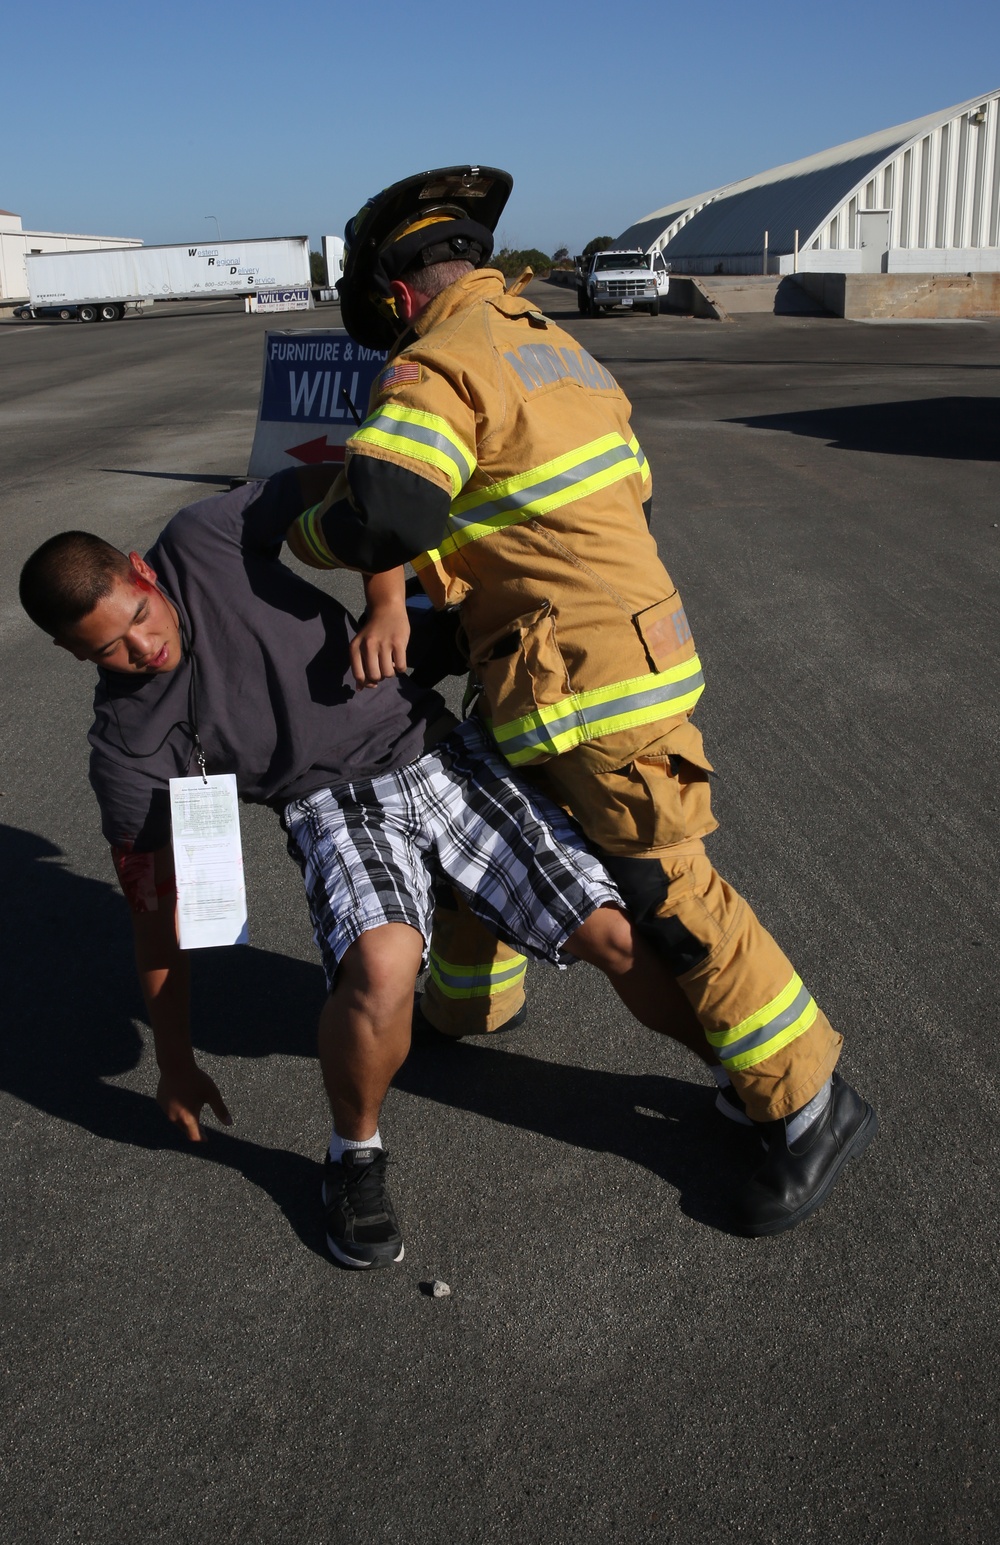 Aircraft mishap exercise provides needed experience for first responder community